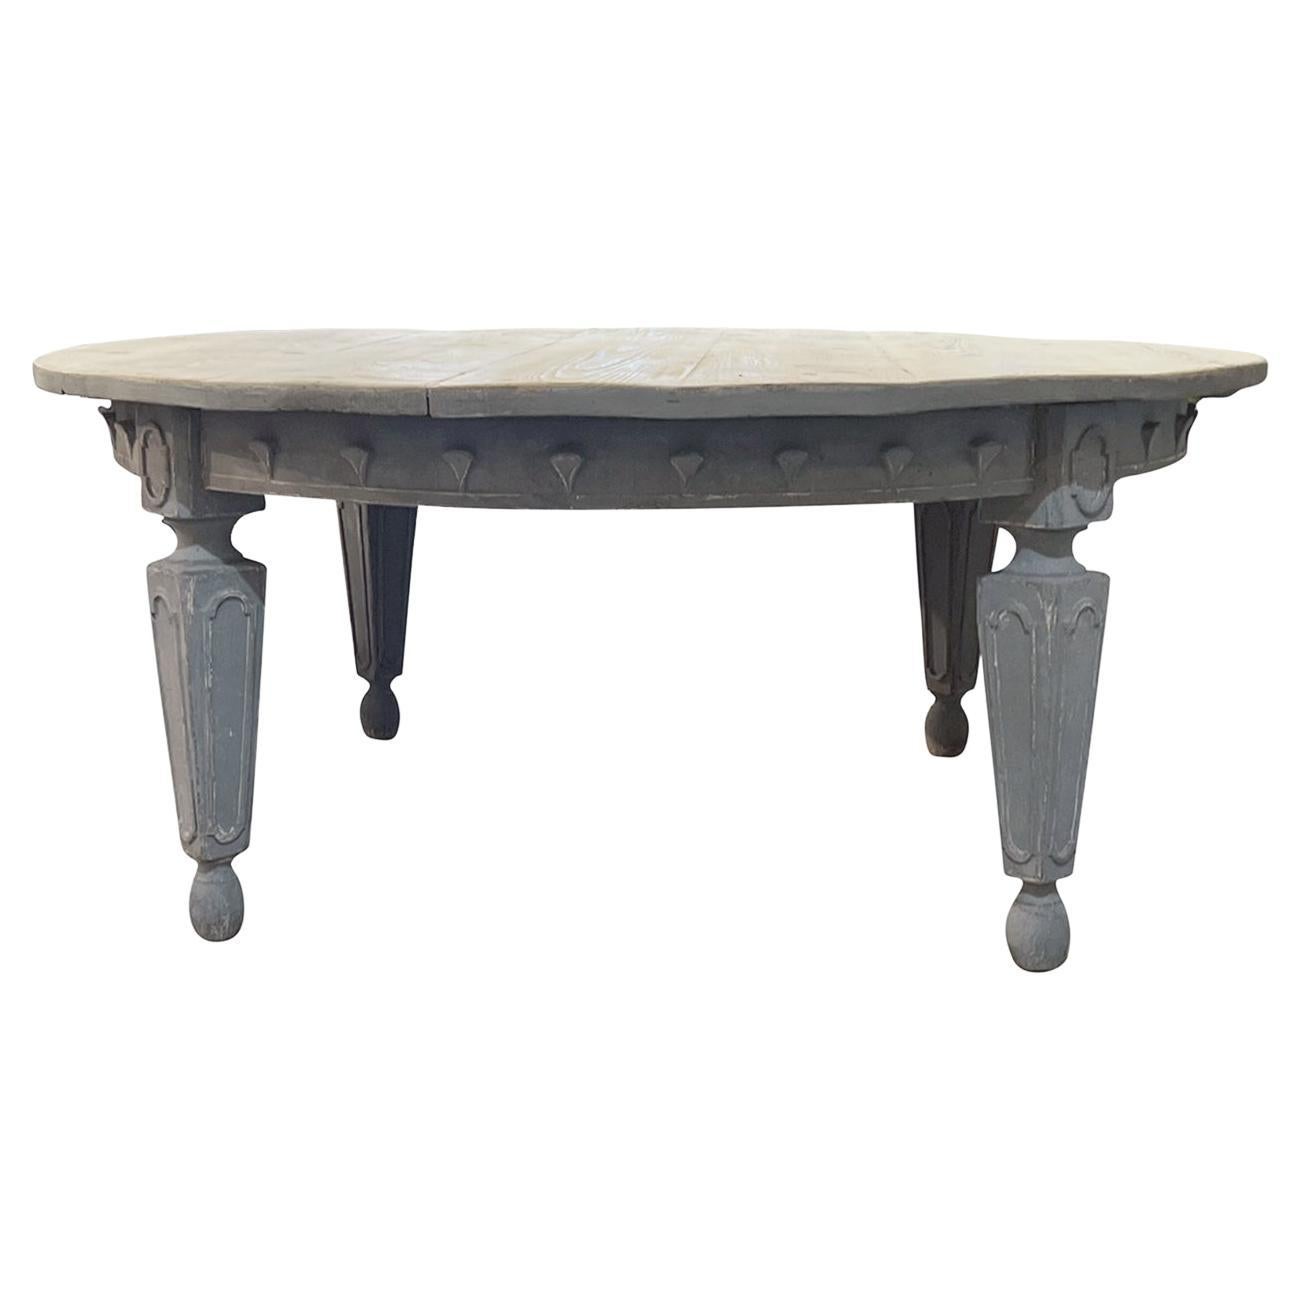 19th Century Italian Pine Dining Room Table - Antique Tuscan Conference Table For Sale